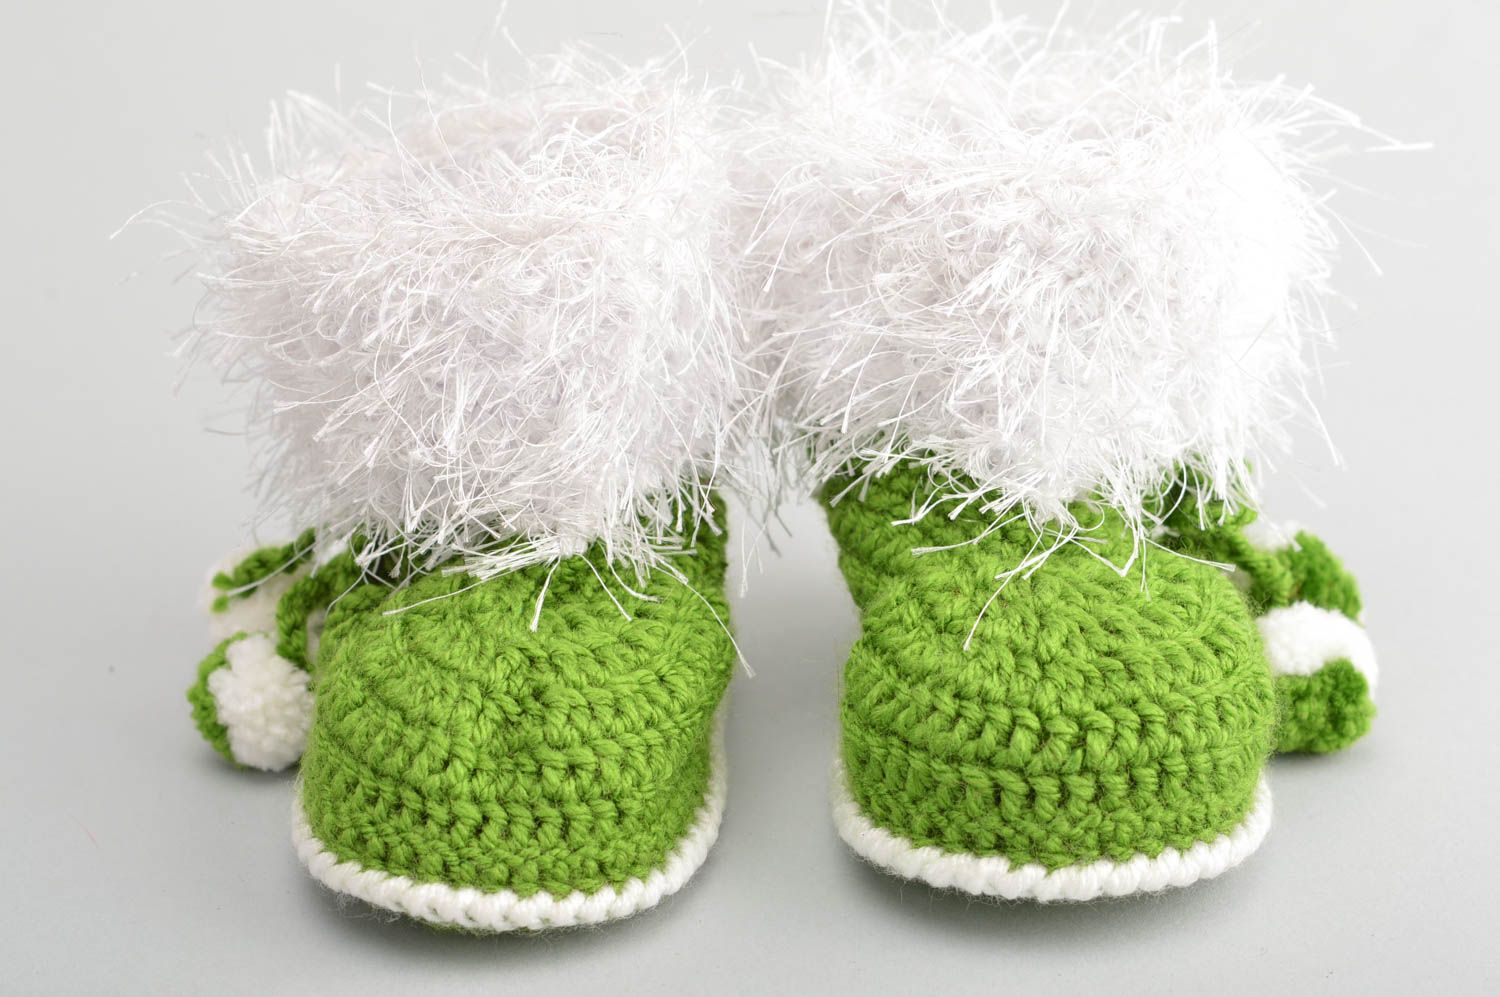 Crocheted designer cute green handmade baby bootees made of acrylics for boys photo 2